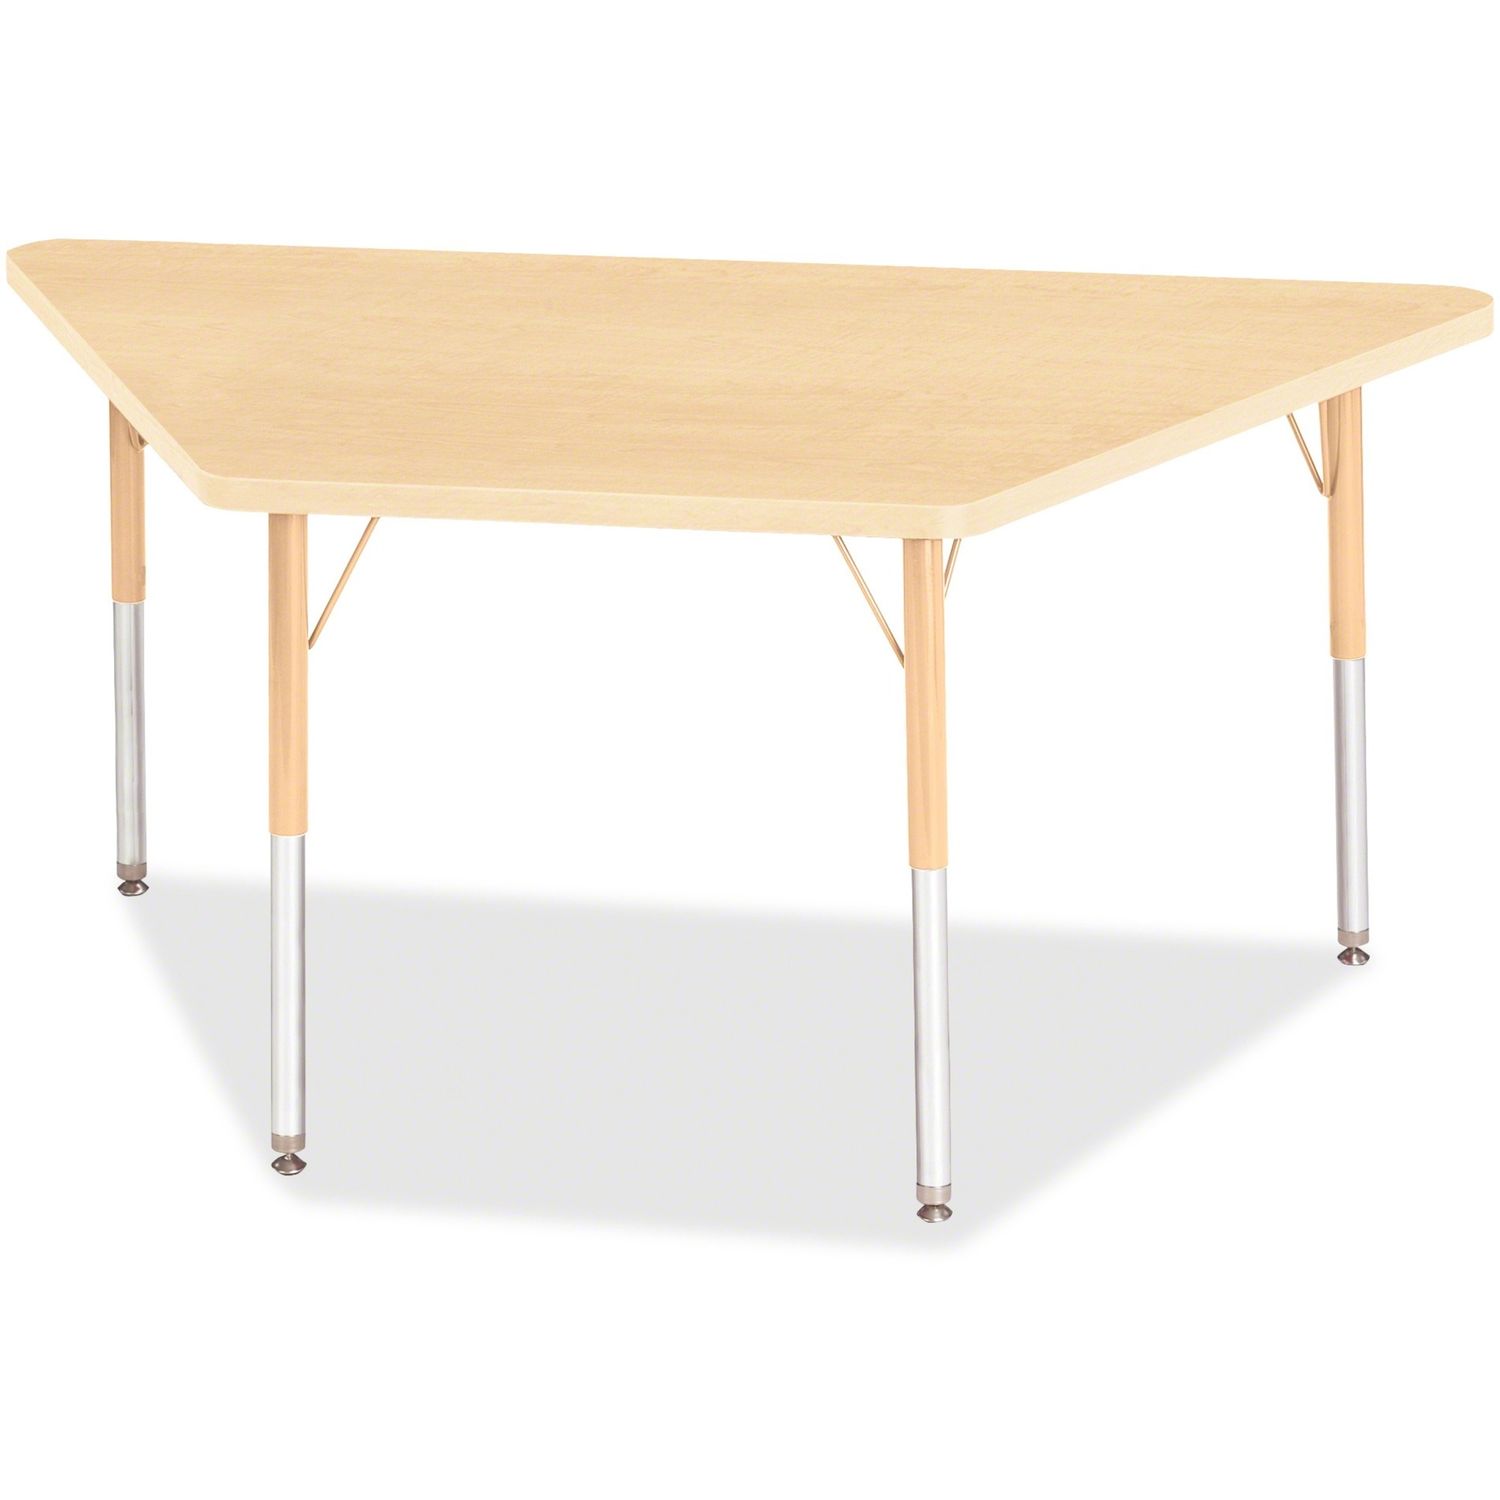 Berries Adult-Size Maple Prism Trapezoid Table Laminated Trapezoid, Maple Top, Four Leg Base, 4 Legs, 60" Table Top Length x 30" Table Top Width x 1.13" Table Top Thickness, 31" Height